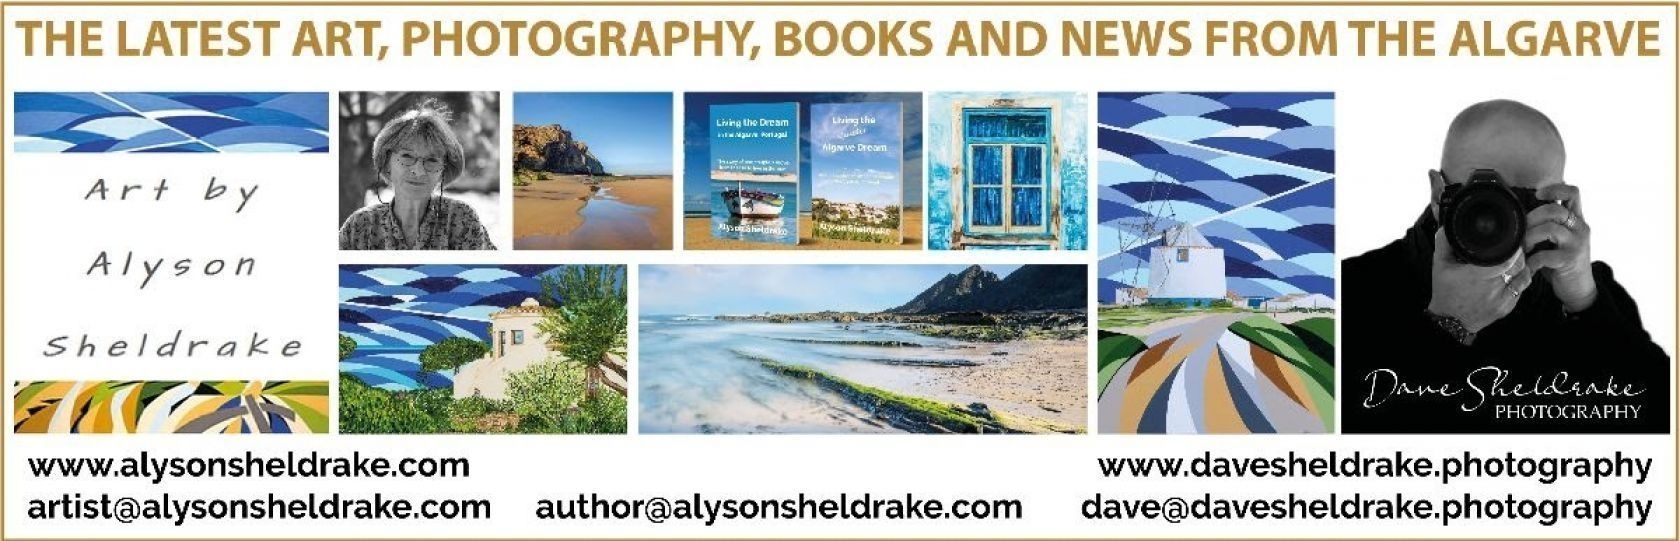 Alyson Sheldrake - Artist and Author NEWSLETTER  - May/2022